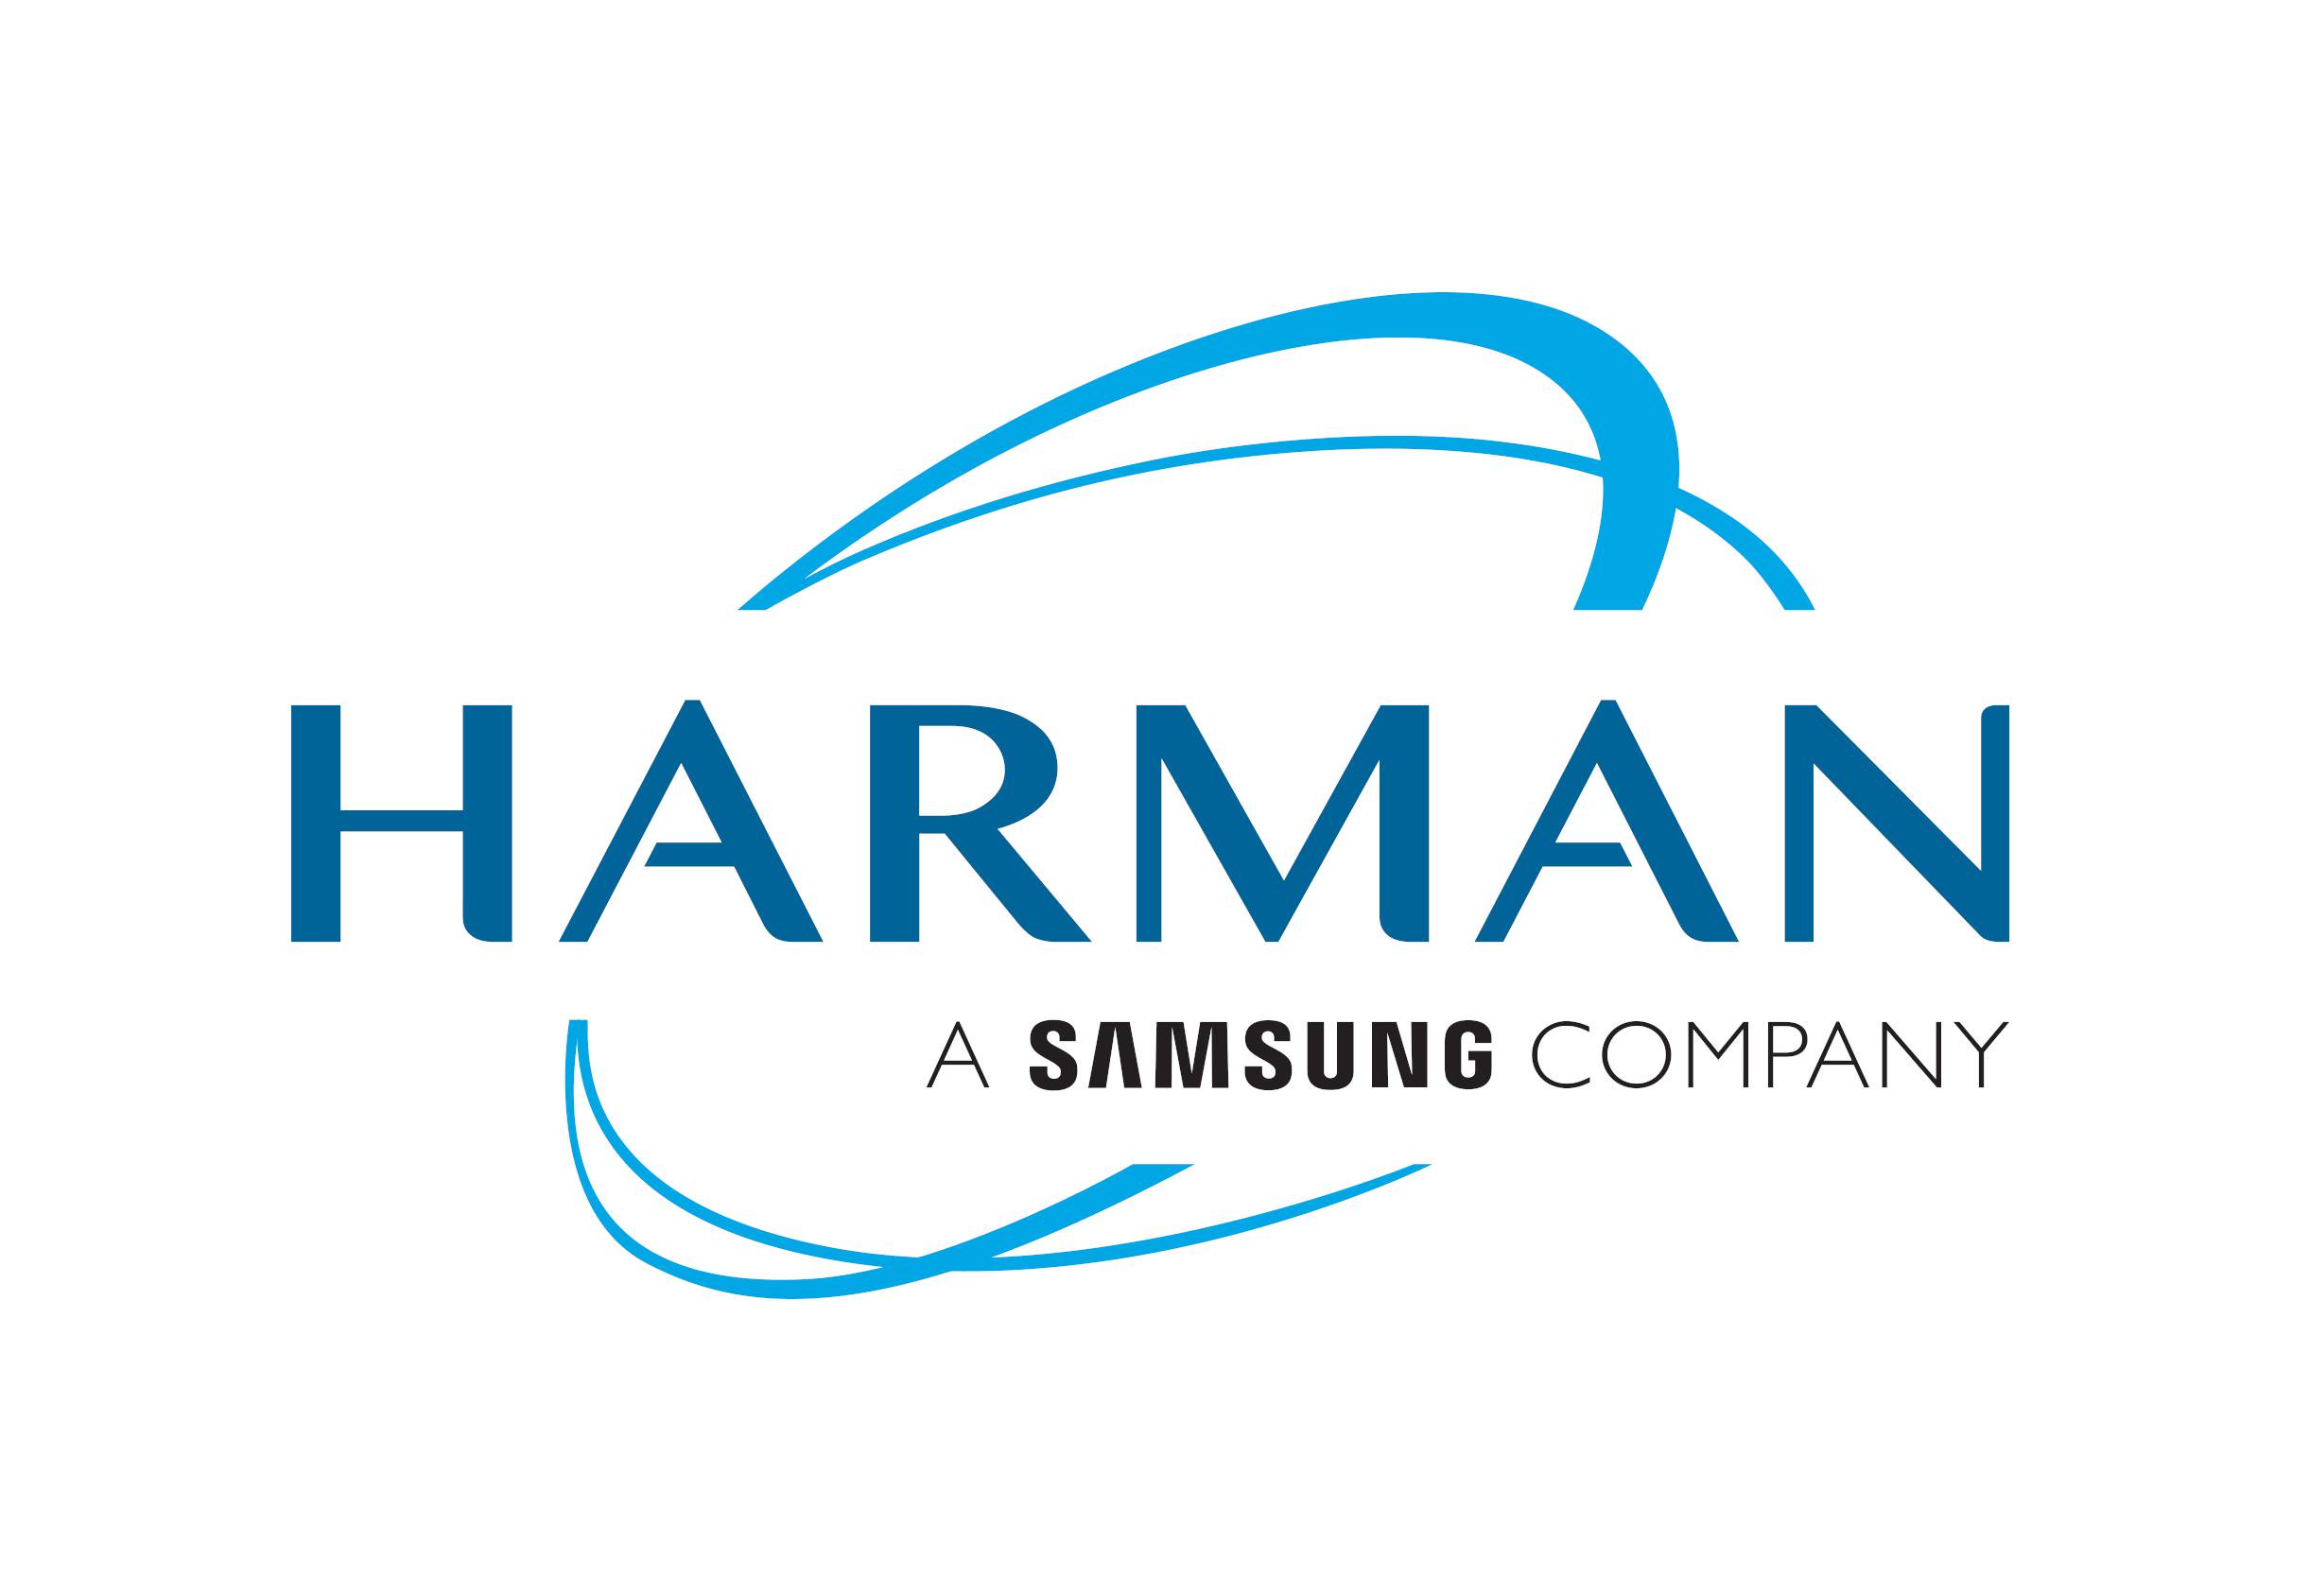 HARMAN Appoints Vikram Kher as Vice President, Lifestyle Audio in India